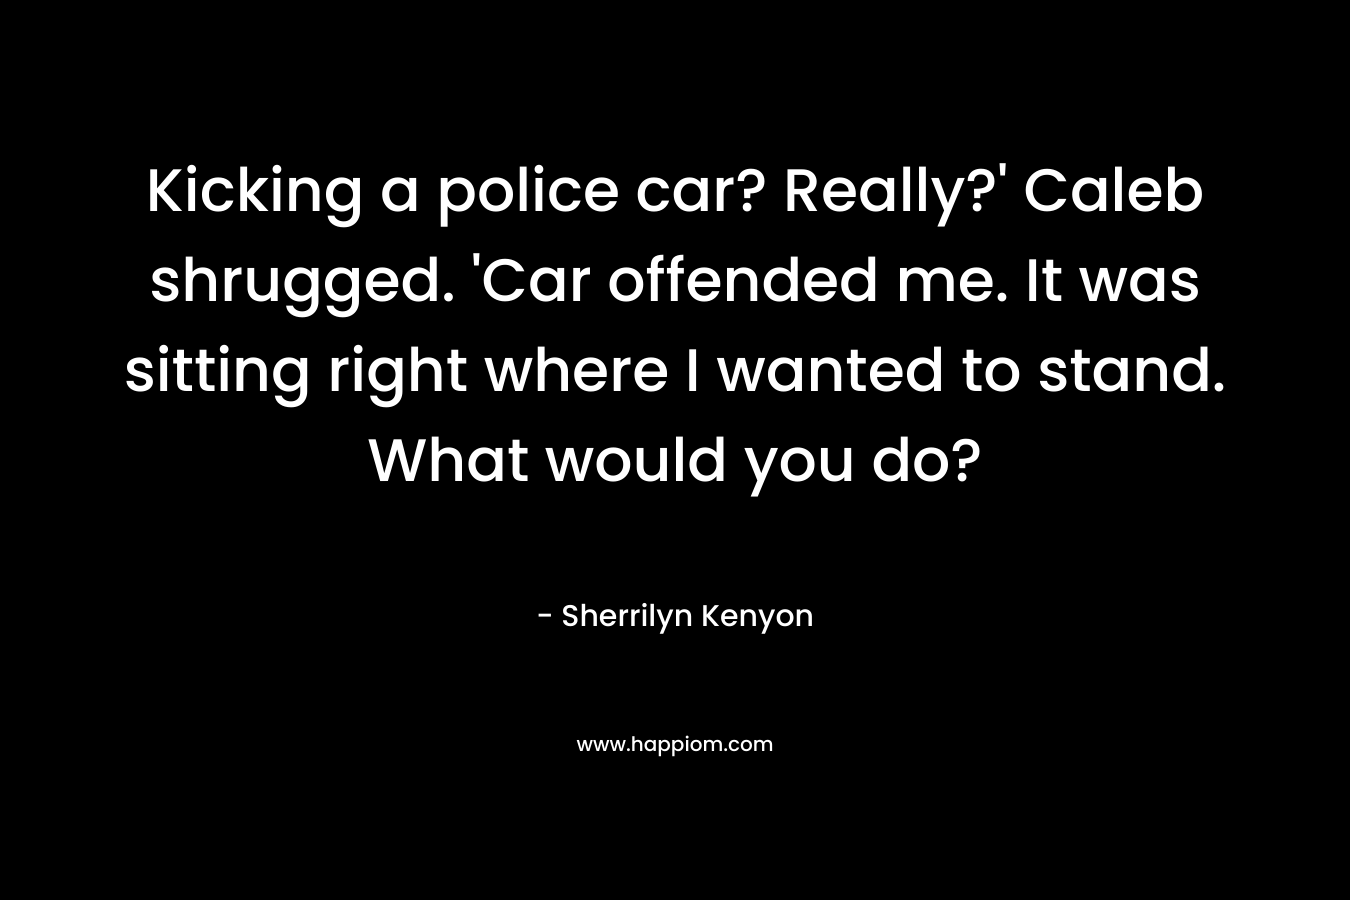 Kicking a police car? Really?' Caleb shrugged. 'Car offended me. It was sitting right where I wanted to stand. What would you do?